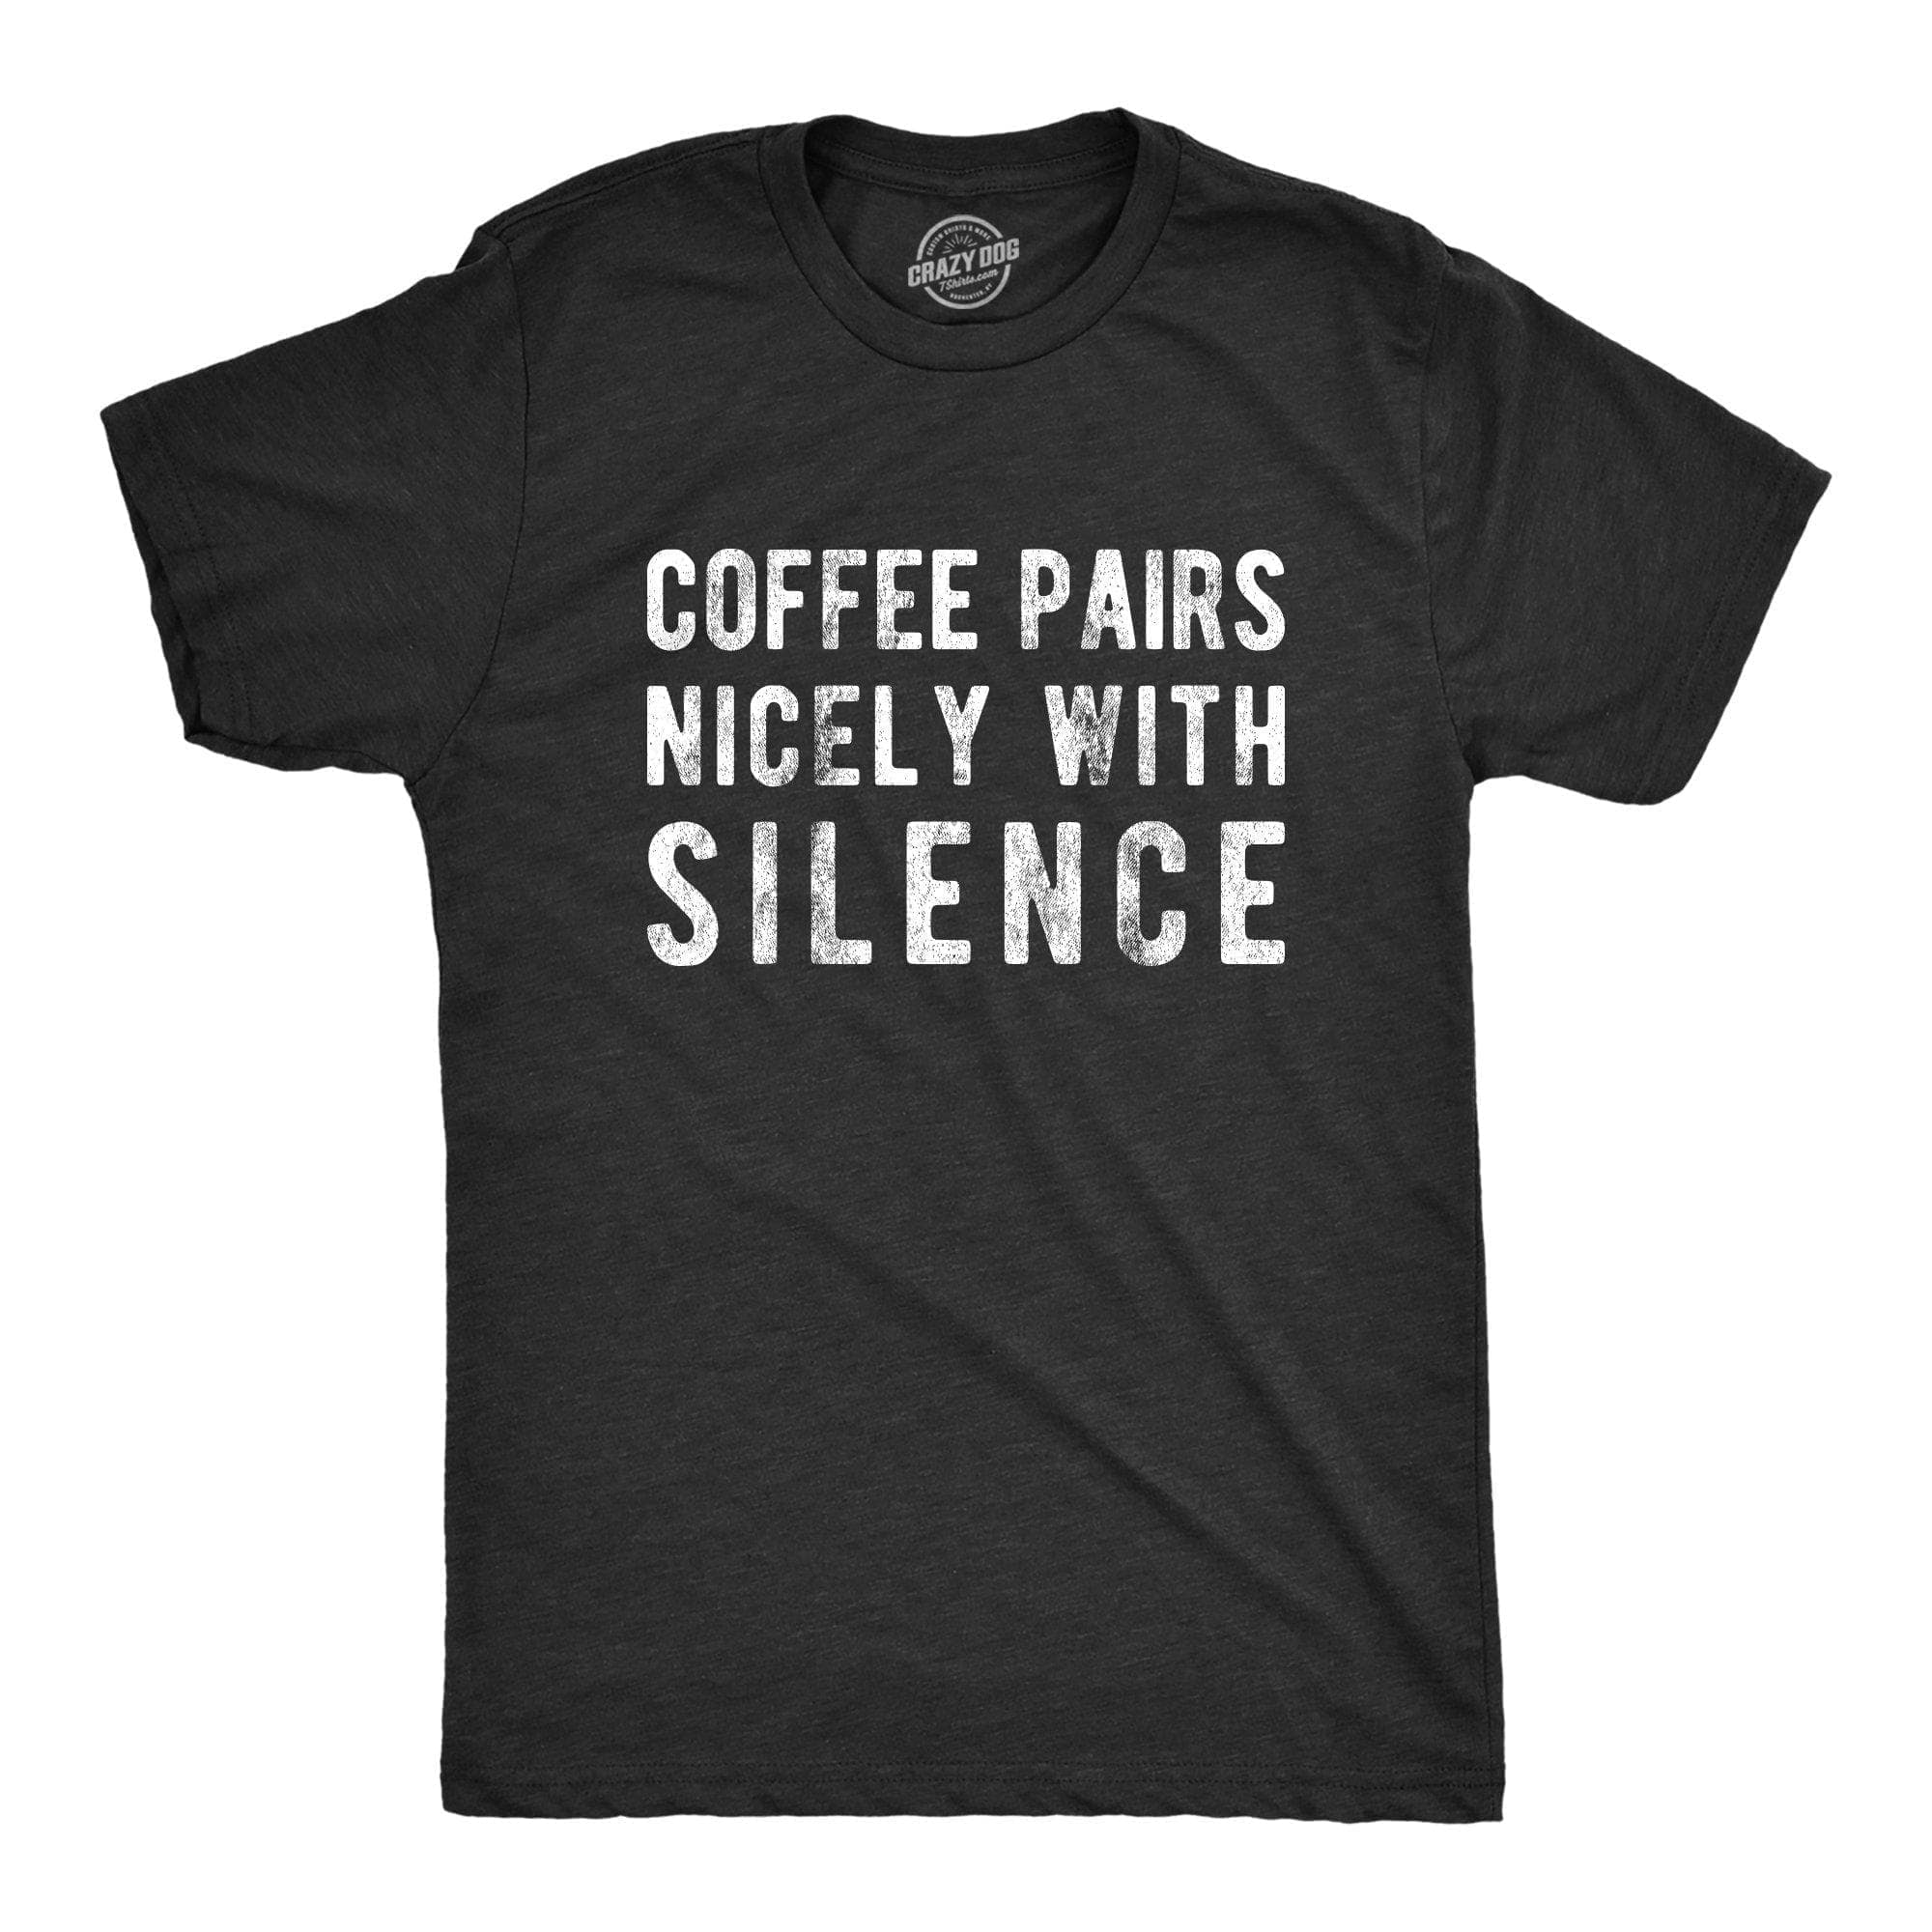 Coffee Pairs Nicely With Silence Men's Tshirt - Crazy Dog T-Shirts